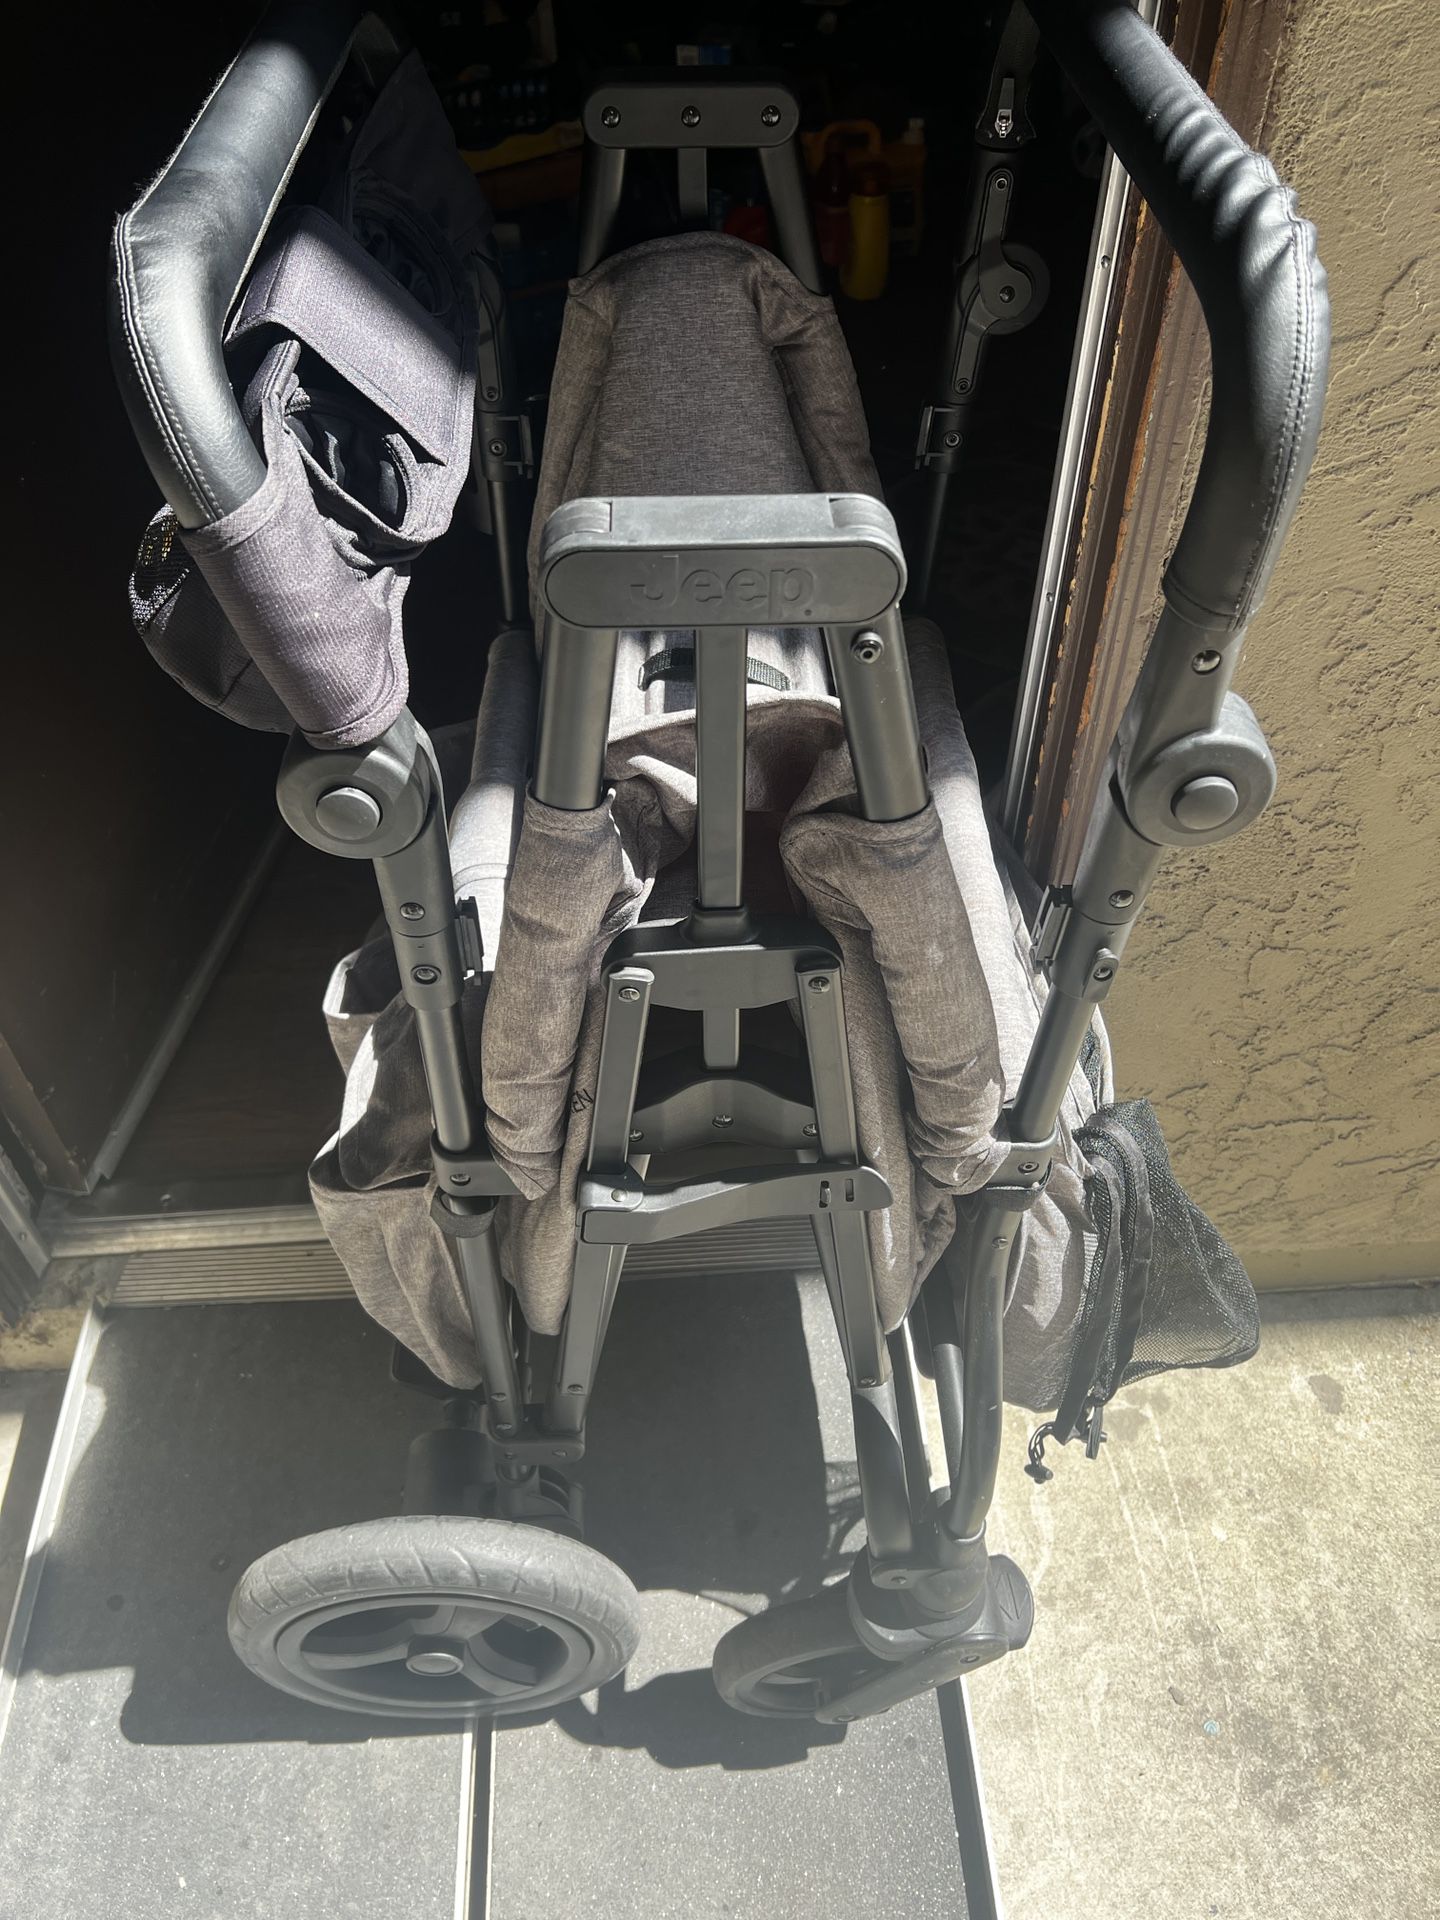 Jeep Wrangler Stroller Wagon with Included Car Seat Adapter by Delta Children - Gray